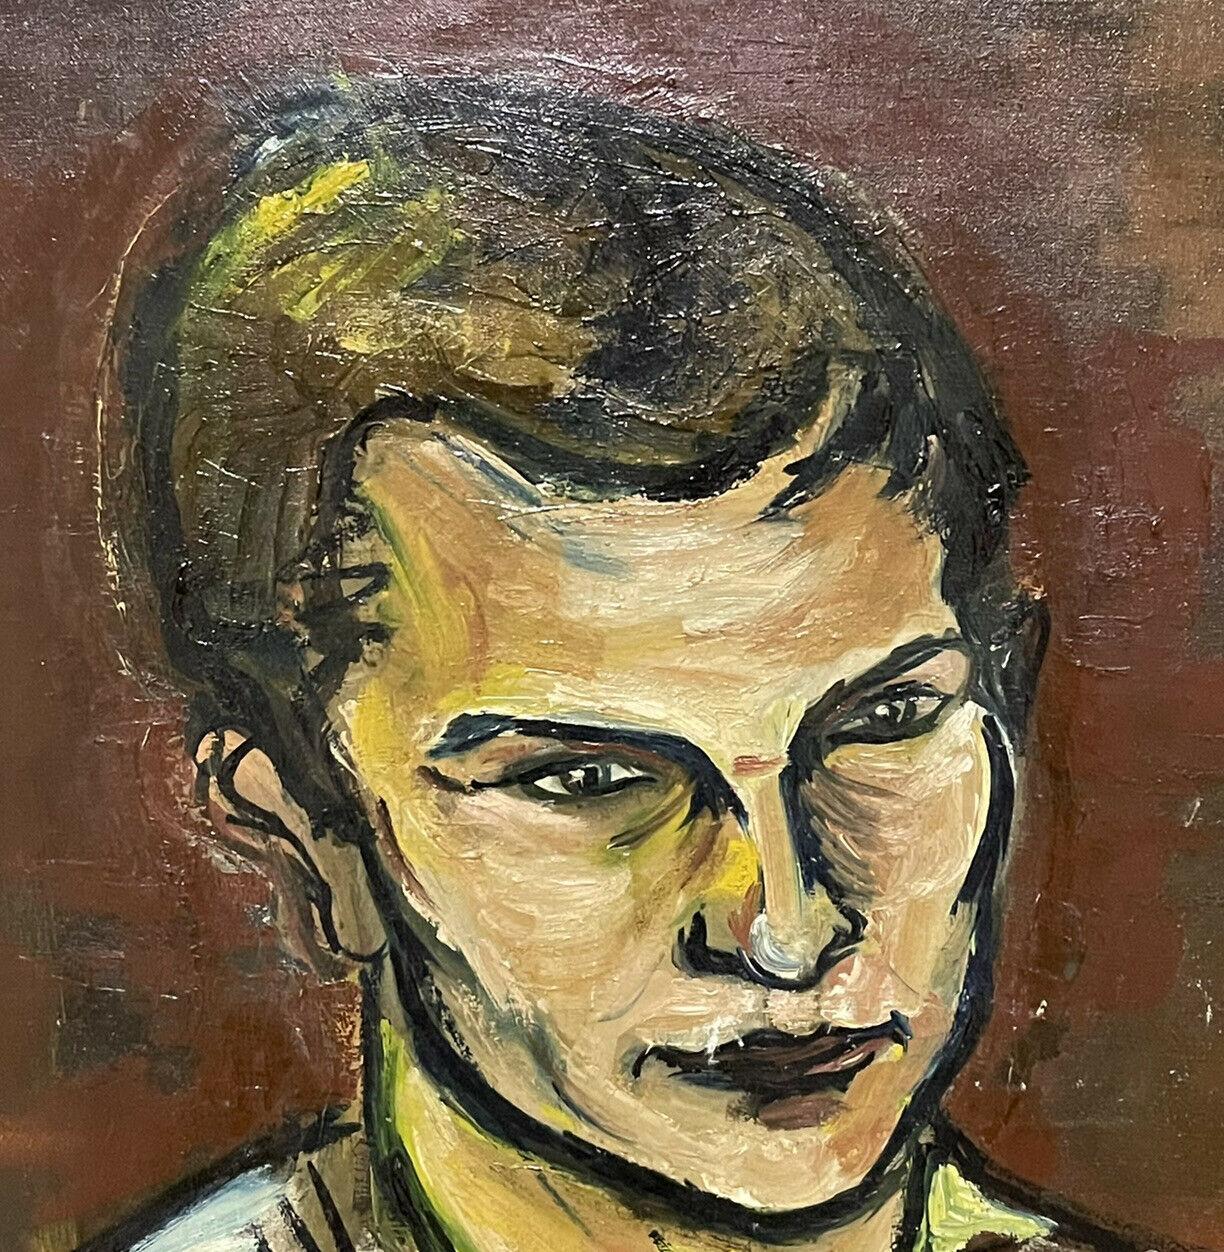 Artist: French School, circa 1970's

Title: Portrait of a Young Man

Medium: oil painting, on coarse textured canvas. 

Size:   painting: 28.5 x 23.5 inches
         
Provenance: private collection, France

Condition: The painting is in good and